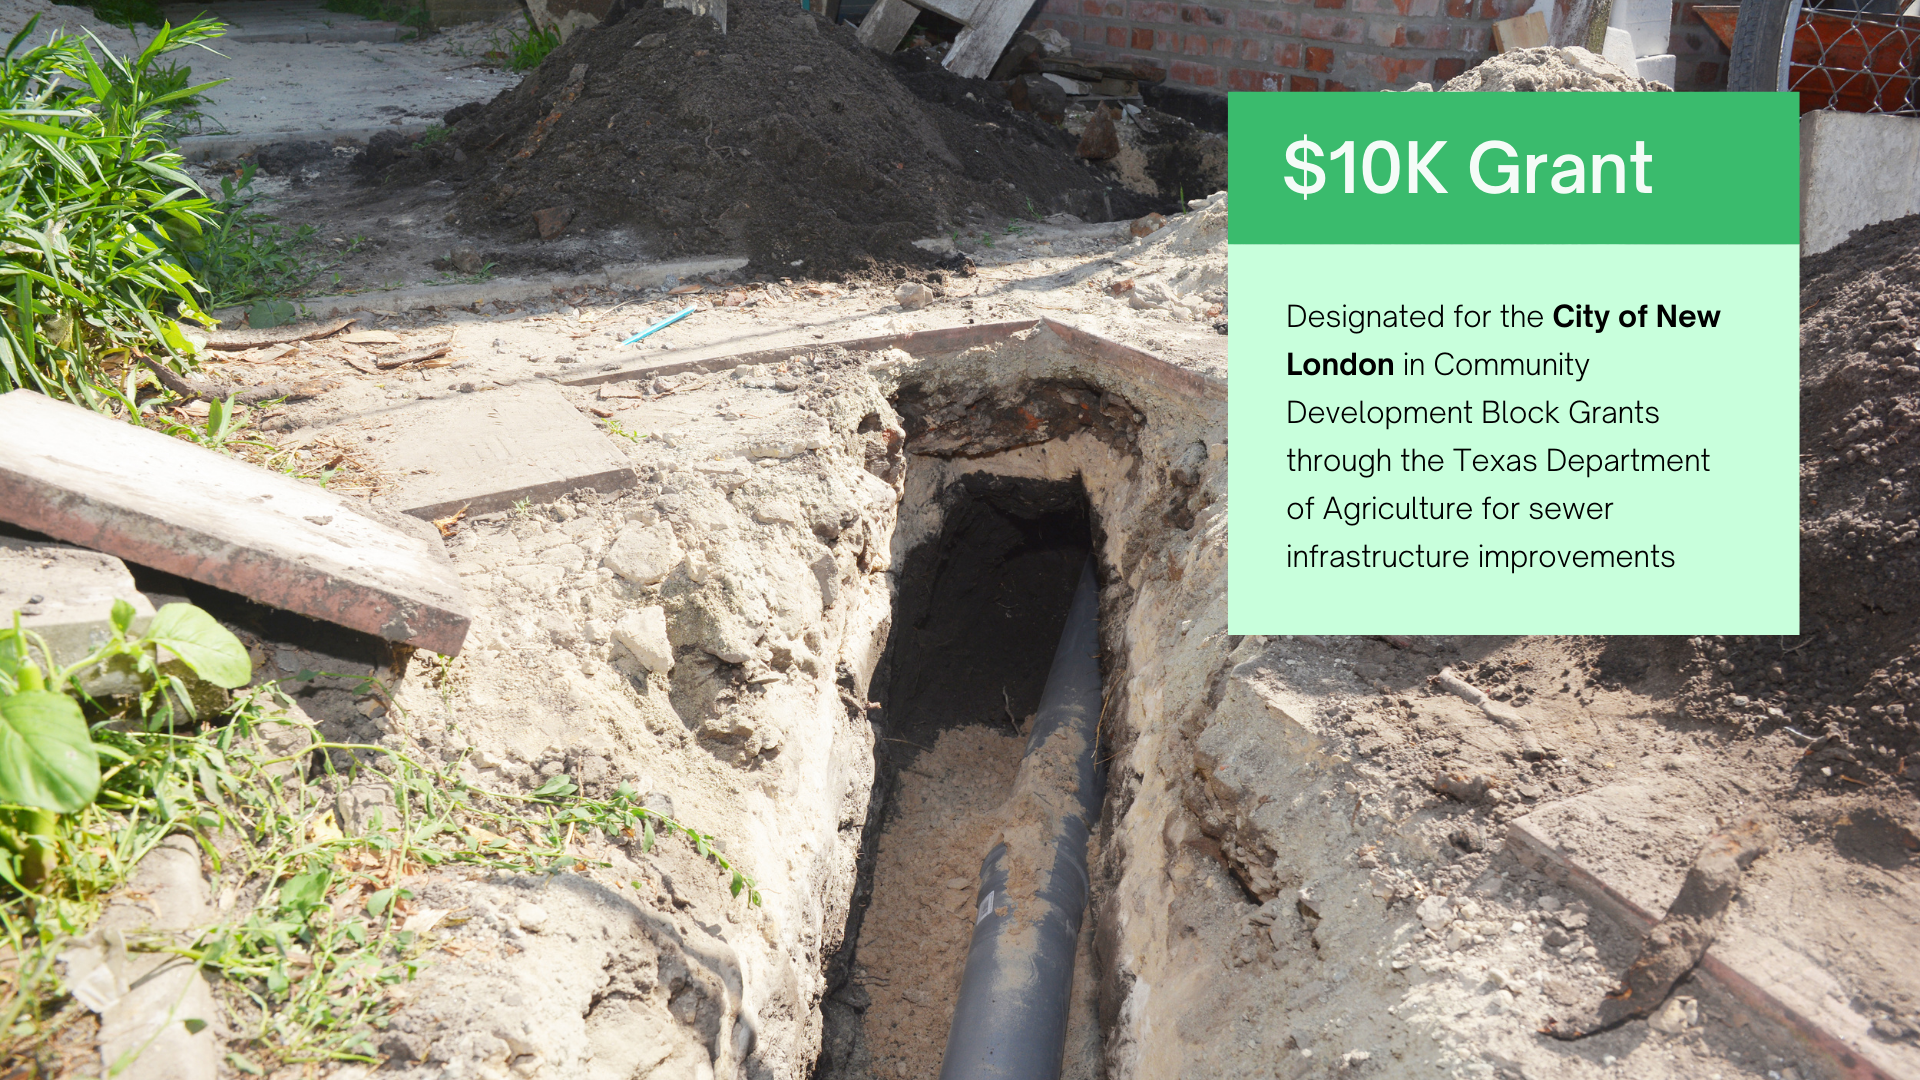 A picture of a hole in the ground with a $ 10k grant written on it